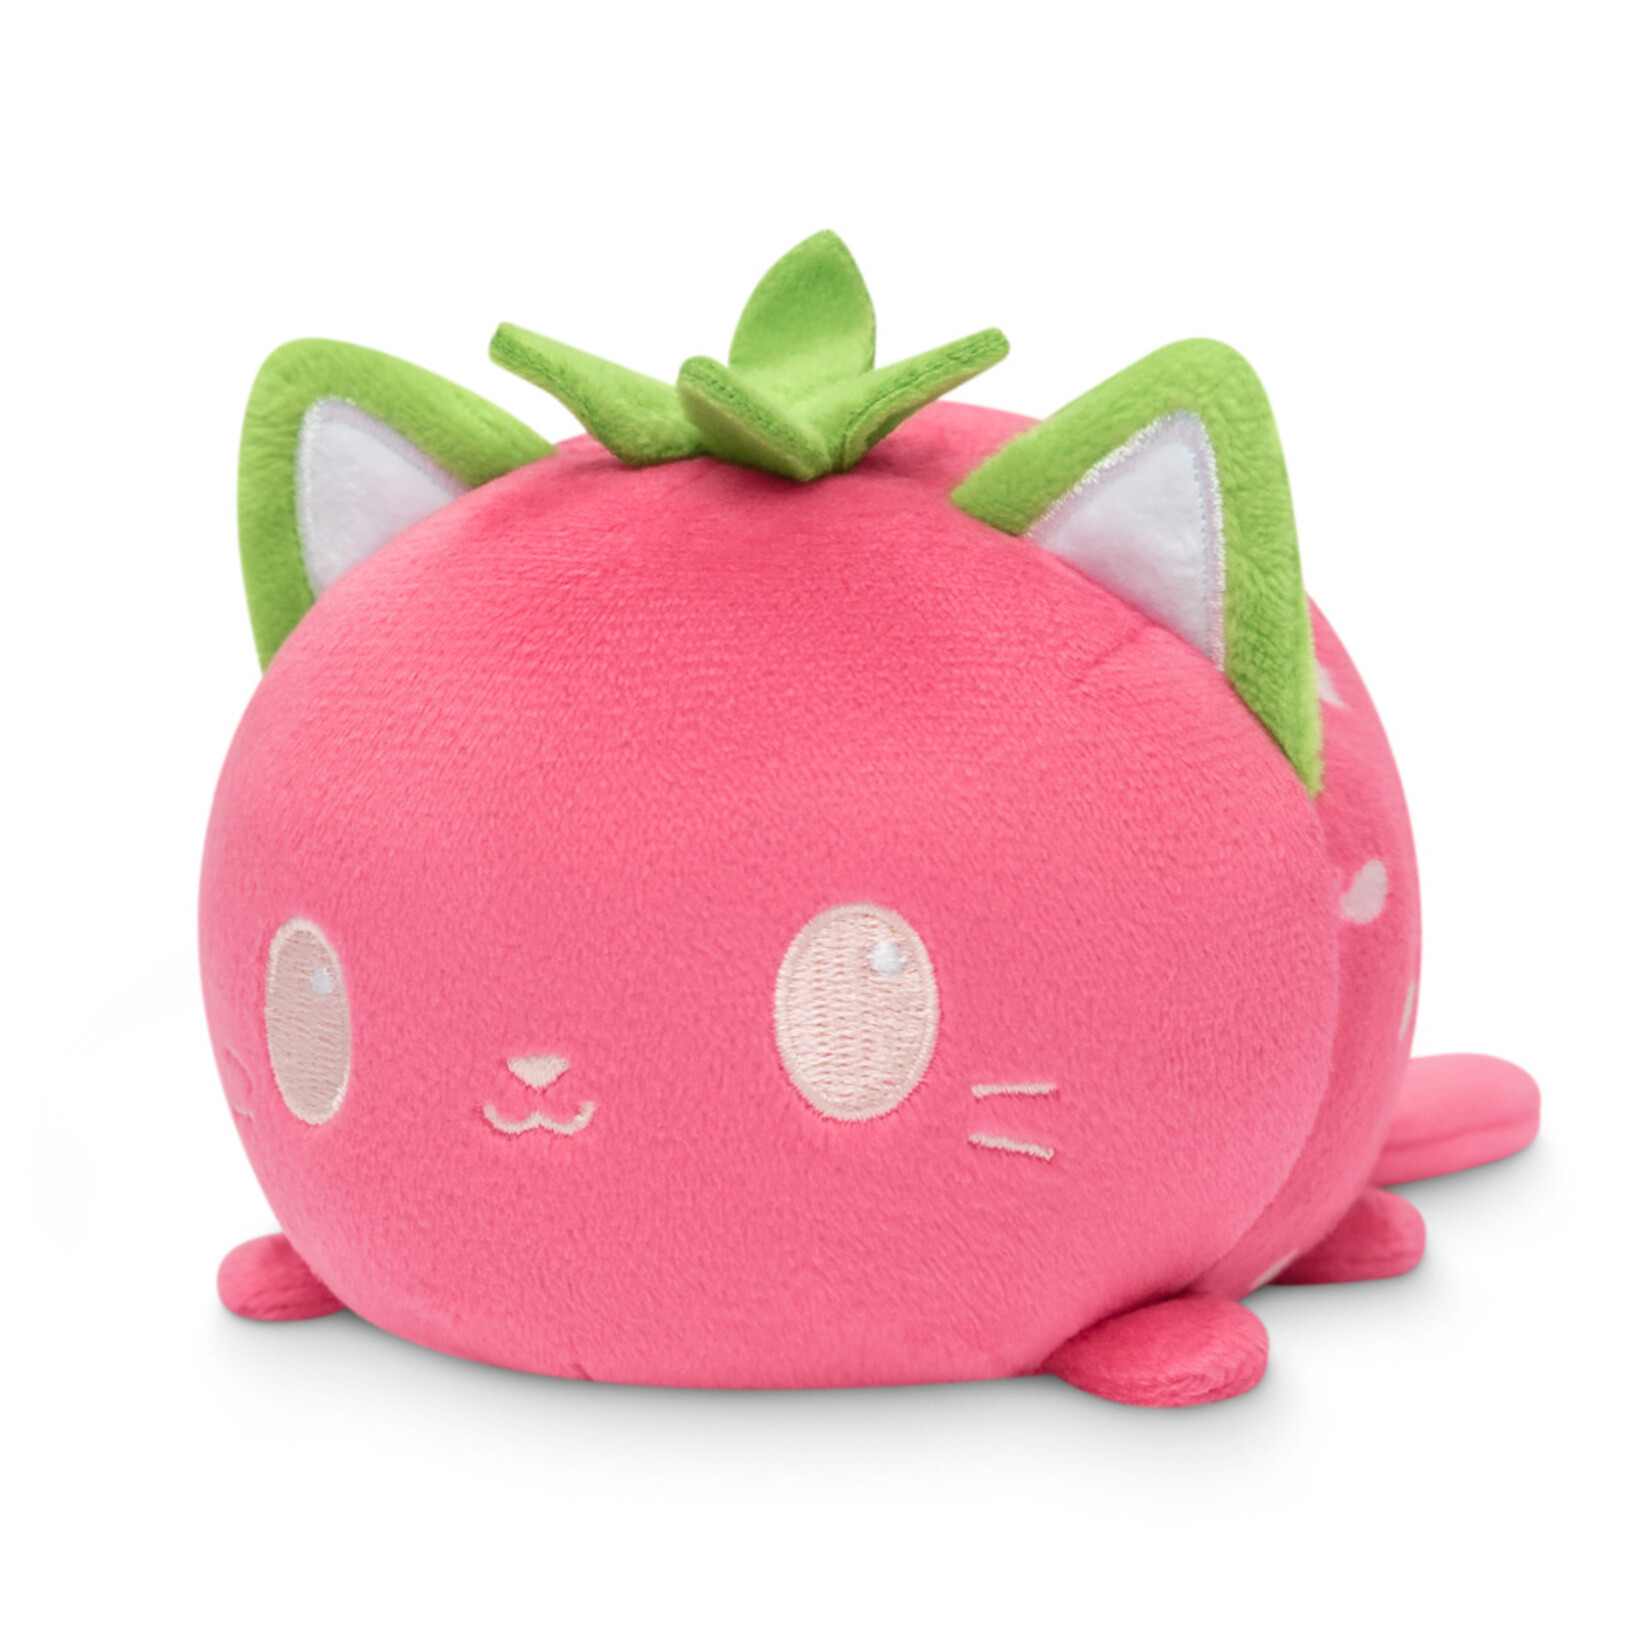 Tee Turtle Plushie Tote: Pink Strawberry Cat